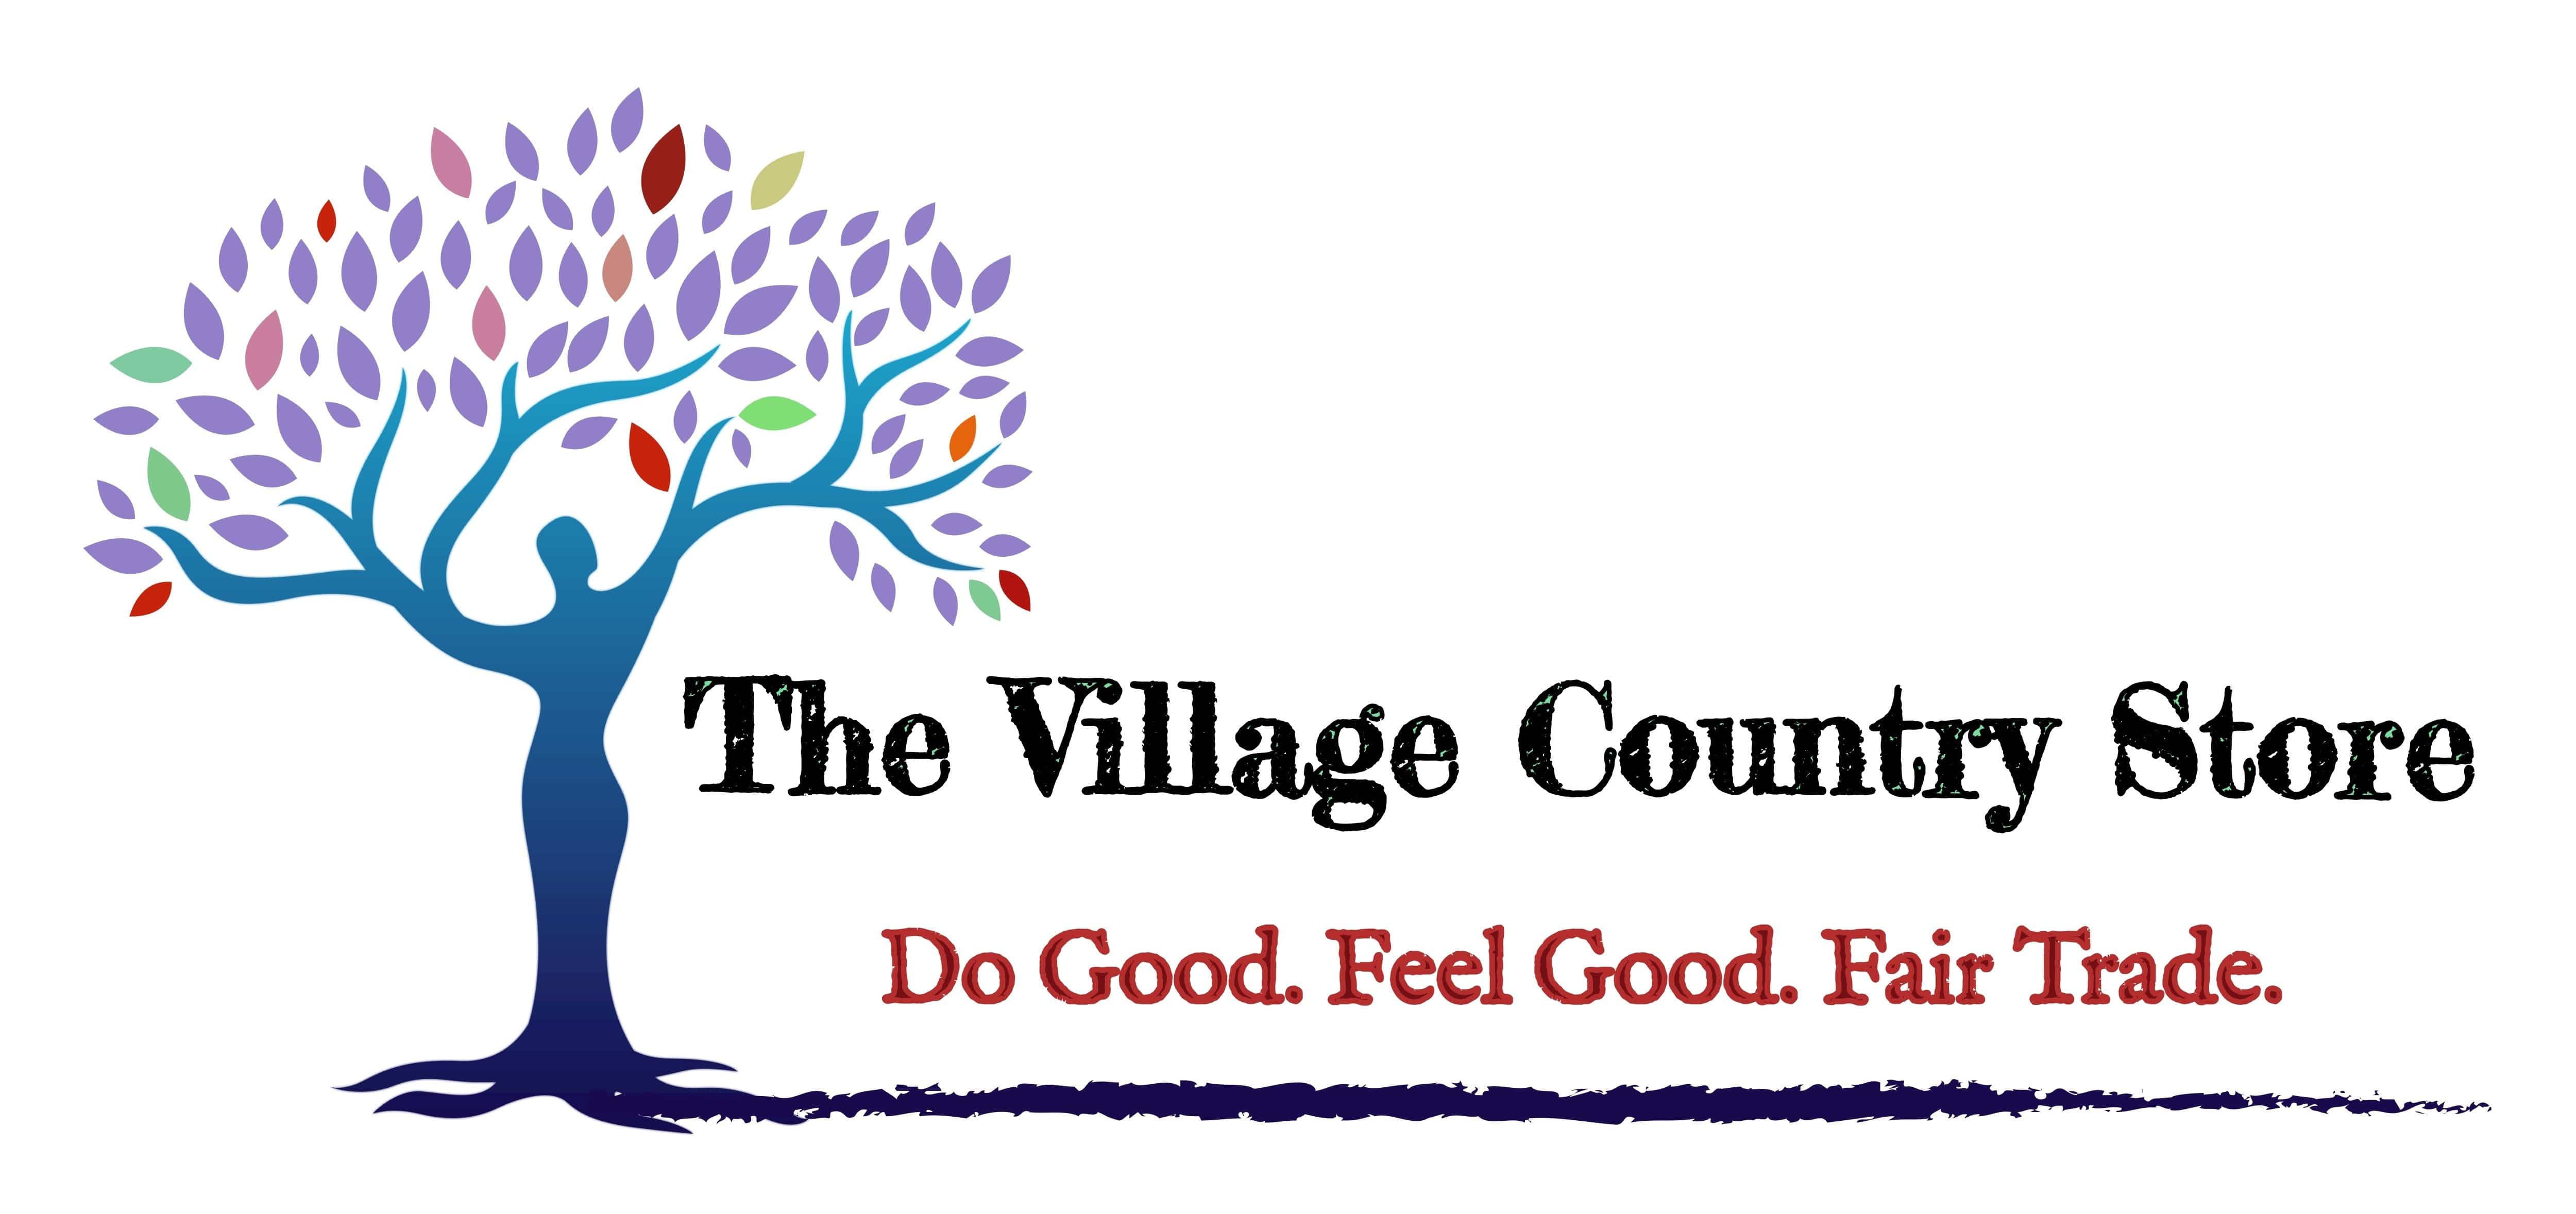 Fair Trade | The Village Country Store